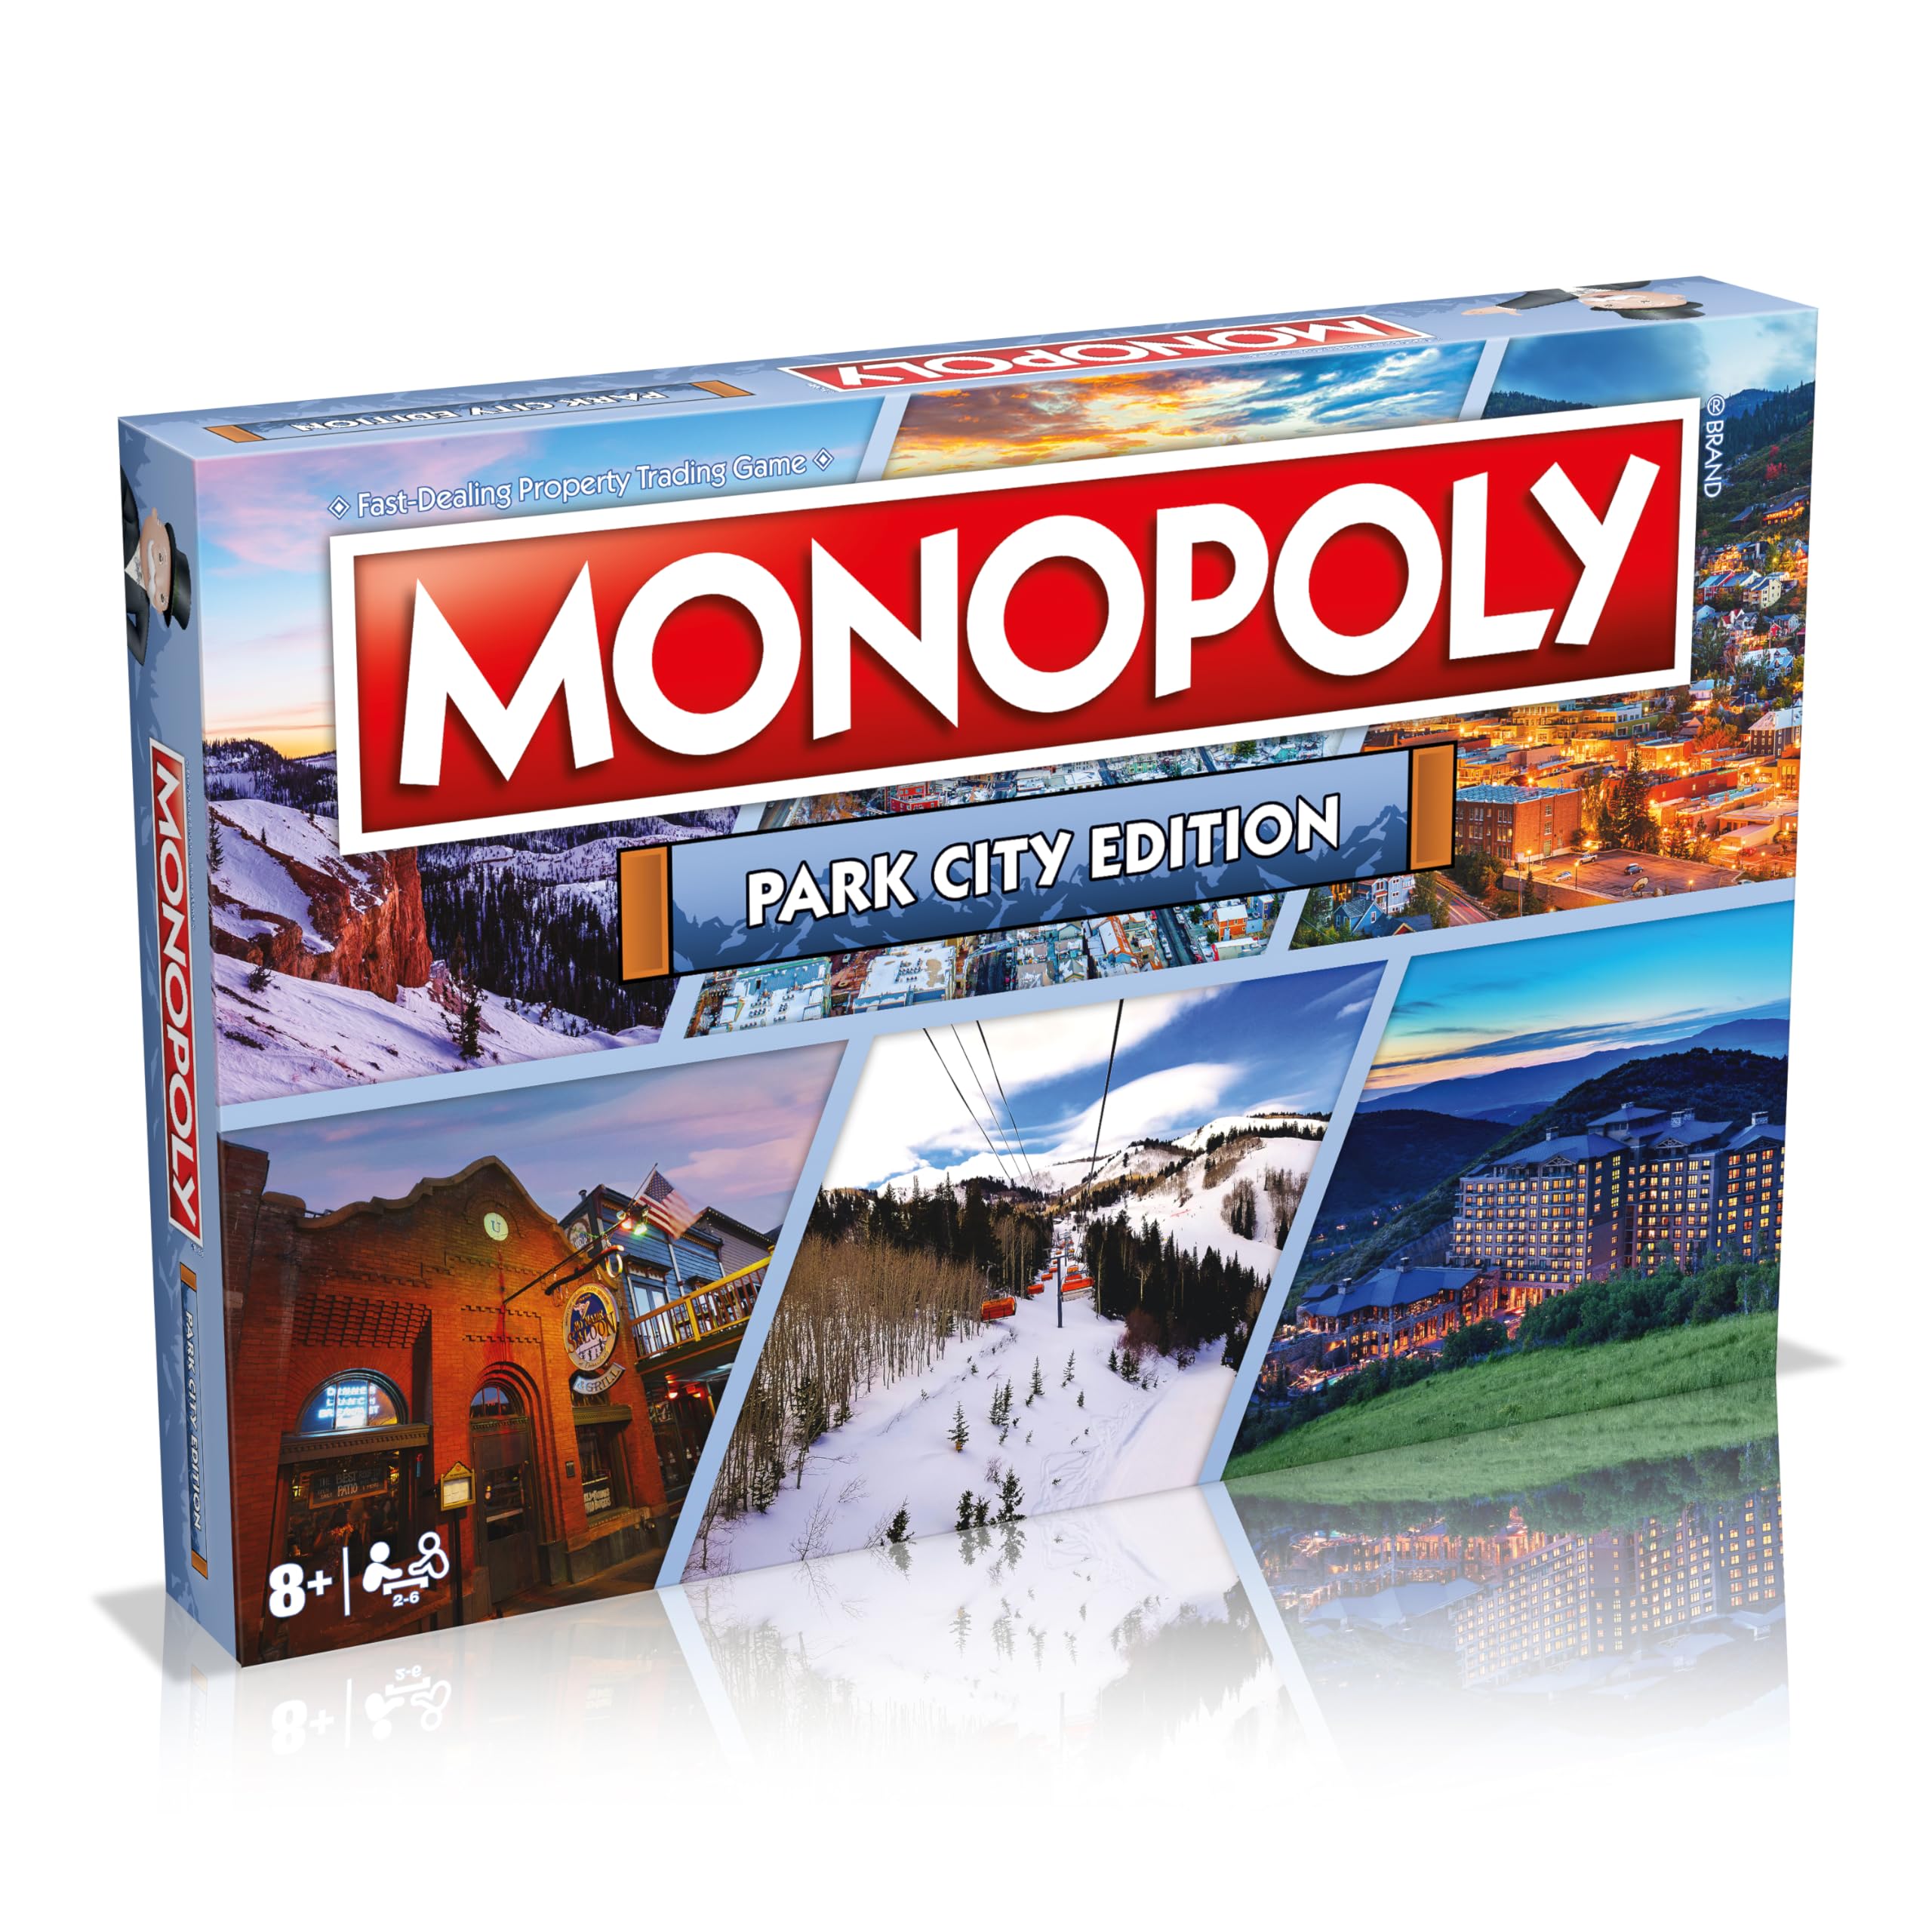 Park City Monopoly Family Board Game, for 2 to 6 Players, Adults and Kids Ages 8 and up, Buy, Sell and Trade Your Way to Success